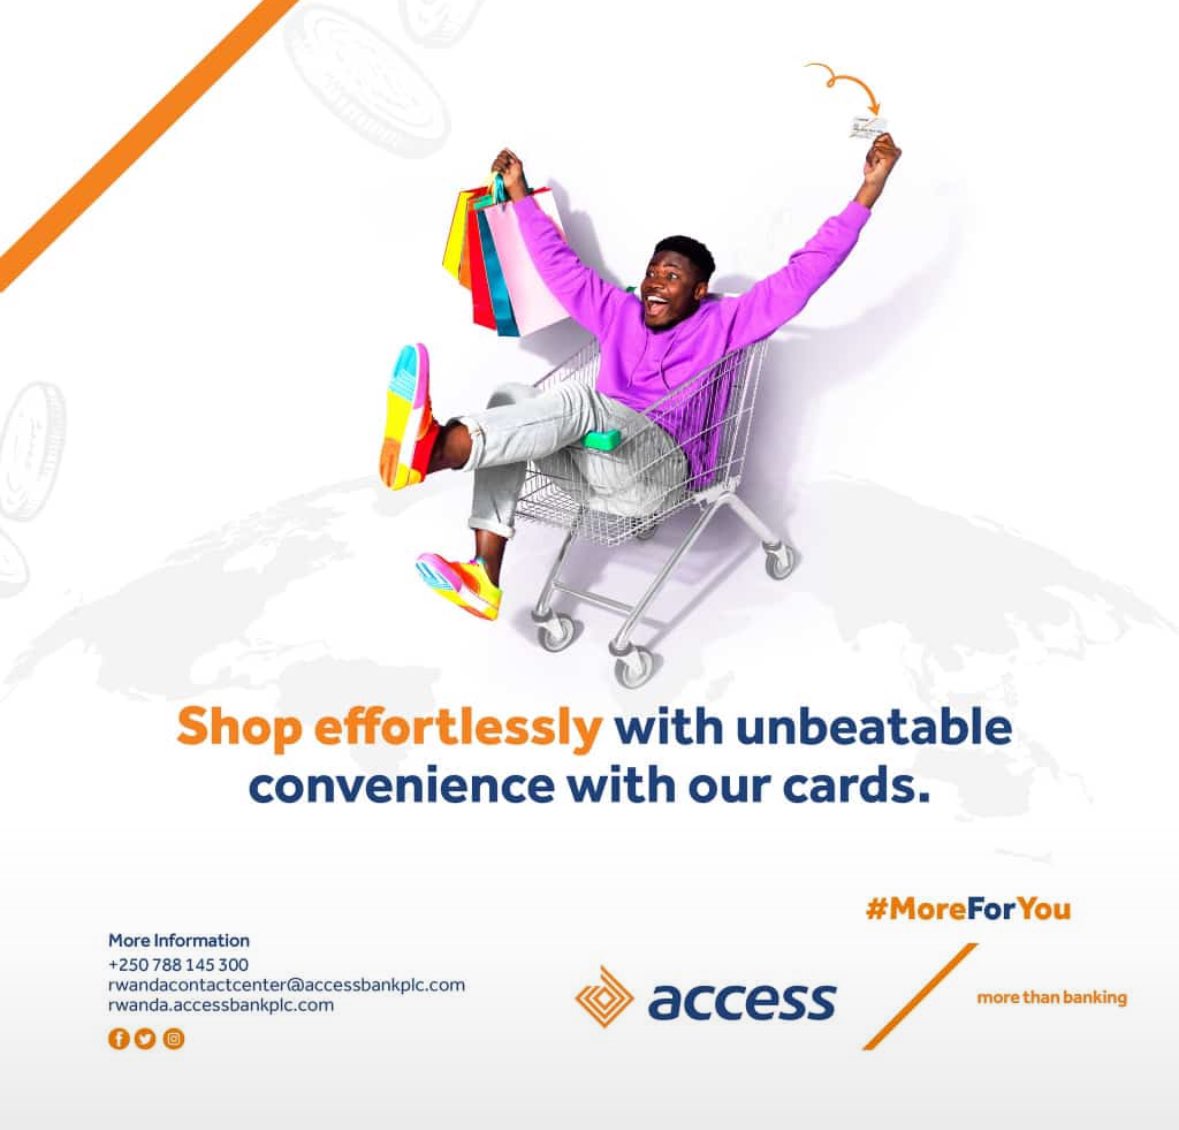 Let’s go CASHLESS with @accessbankrw 🤗

#AccessCares
#MoreForYou